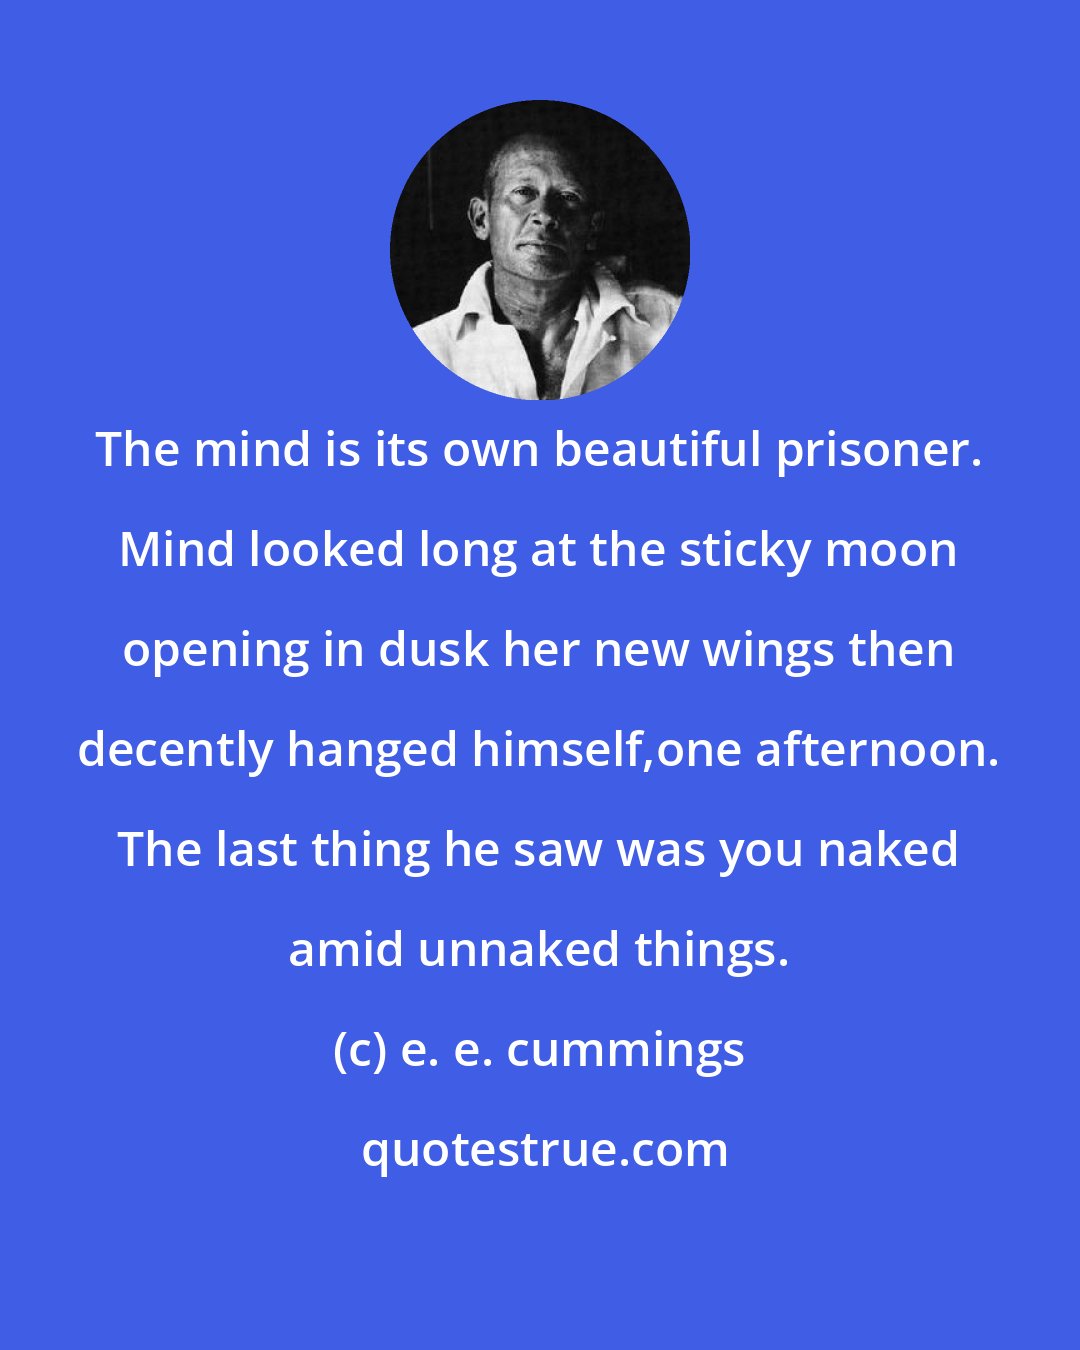 e. e. cummings: The mind is its own beautiful prisoner. Mind looked long at the sticky moon opening in dusk her new wings then decently hanged himself,one afternoon. The last thing he saw was you naked amid unnaked things.